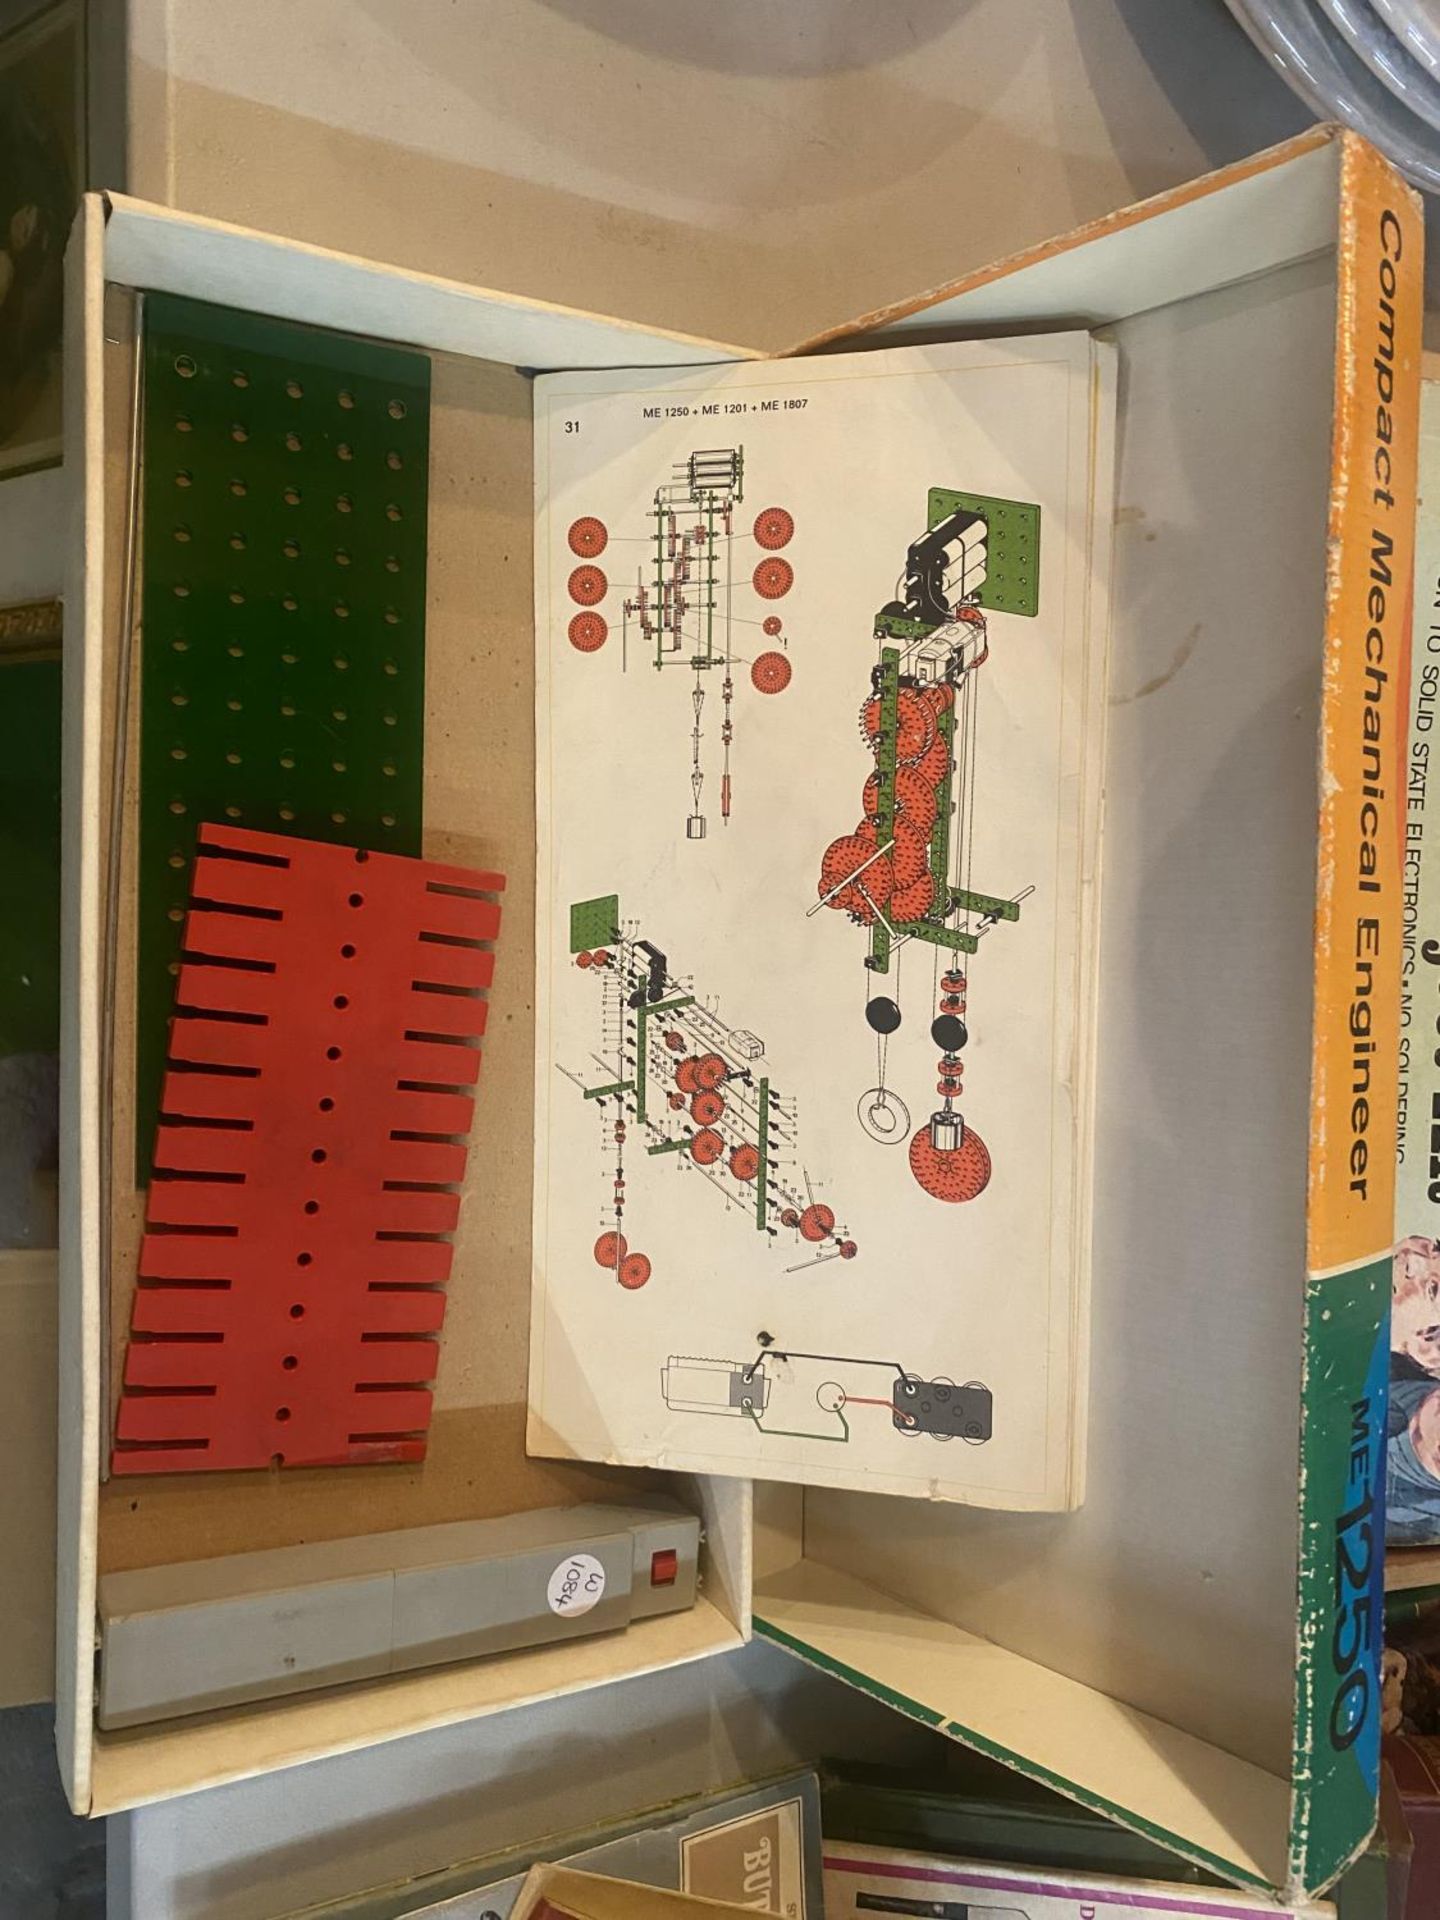 A VINTAGE MONOPOLY SET, COMPACT MECHANICAL ENGINEER SET AND AN ELECTRONIC PROJECT KIT - Image 3 of 4